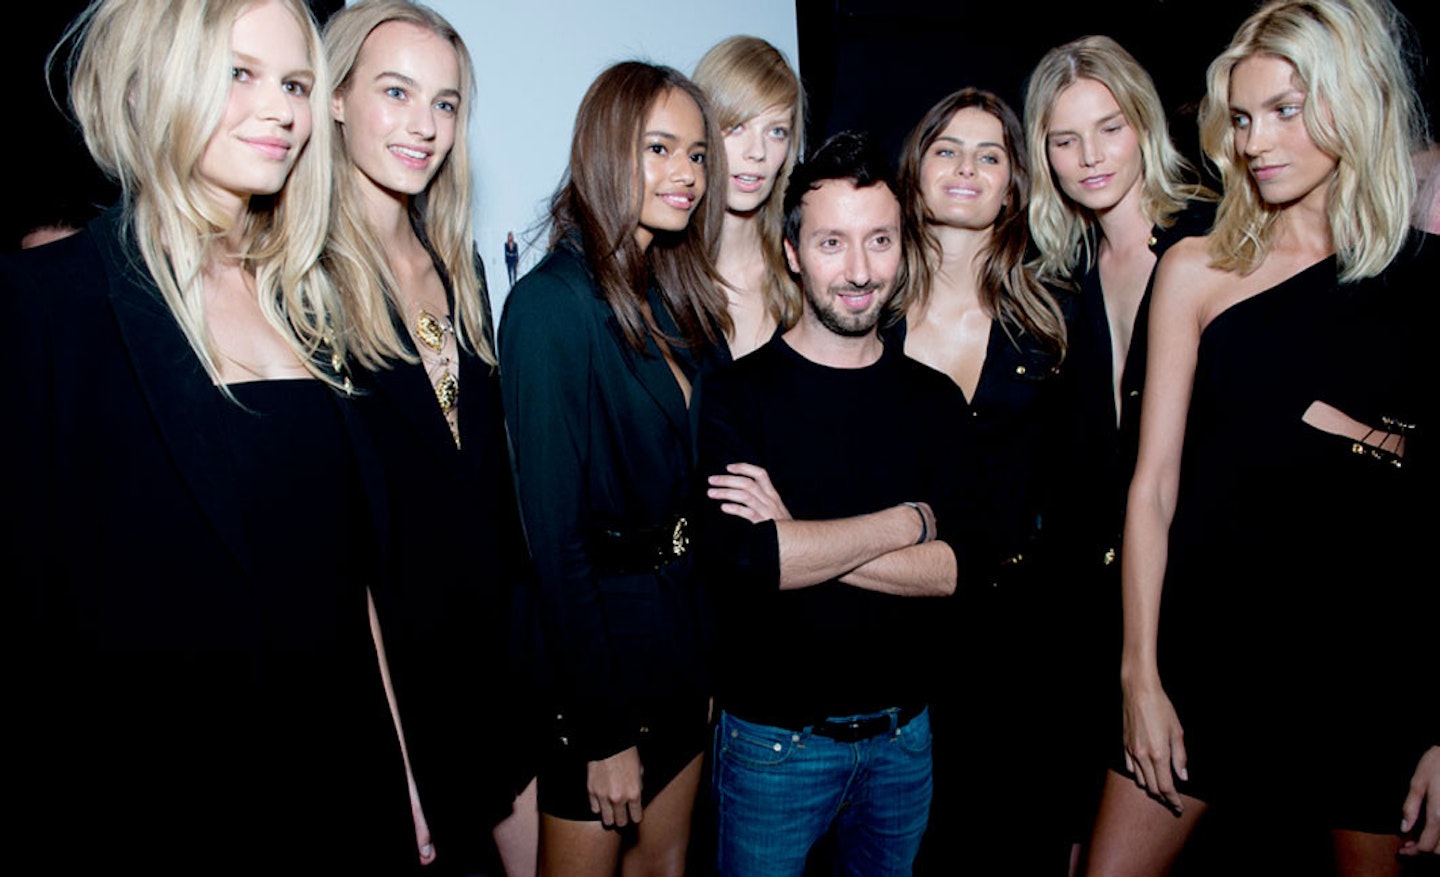 Anthony and his Versus girls